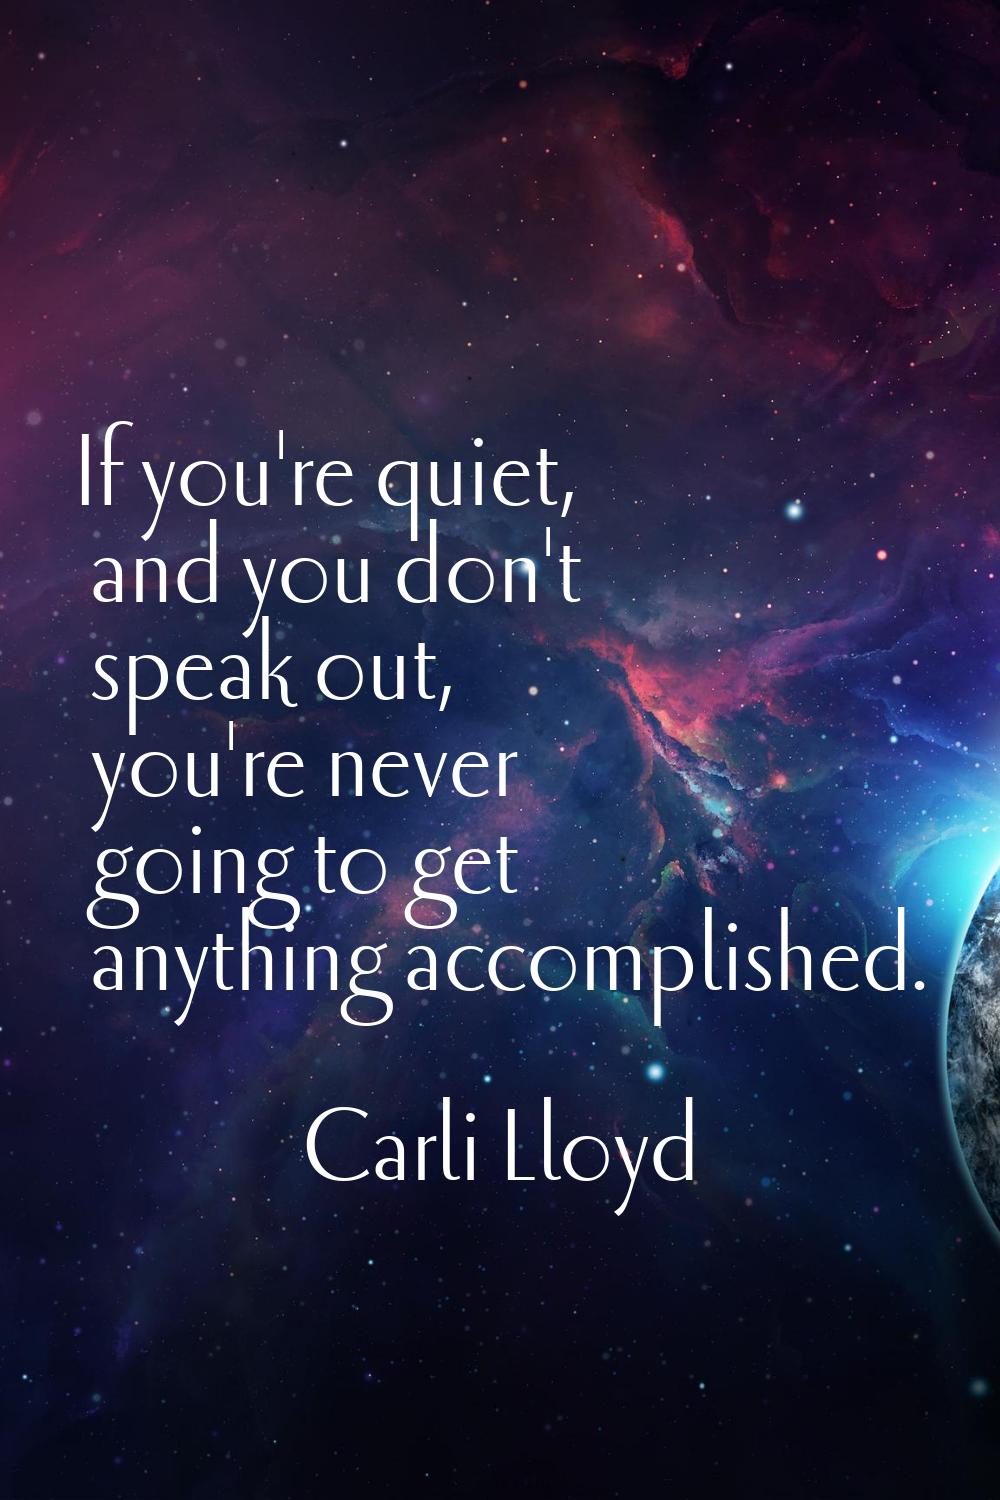 If you're quiet, and you don't speak out, you're never going to get anything accomplished.